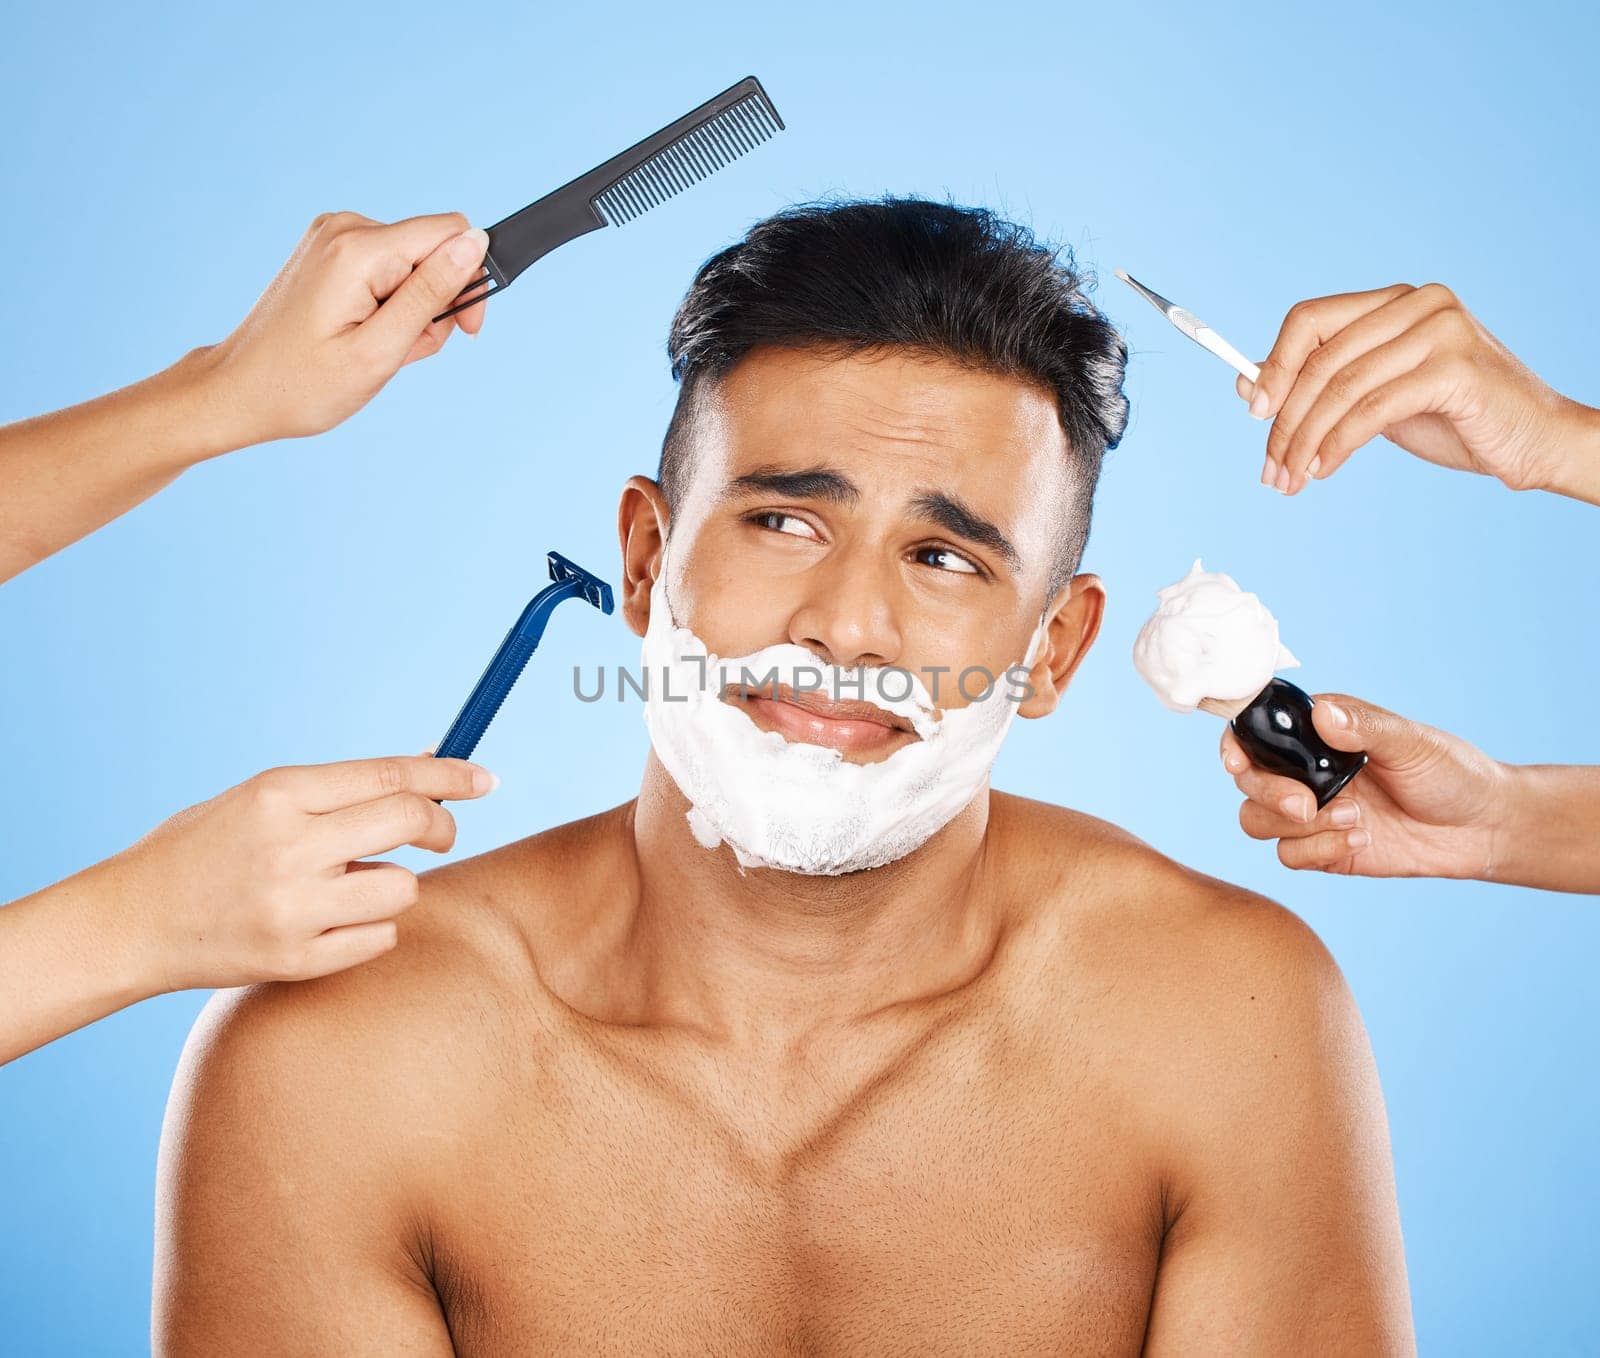 Hands, cleaning and man in studio for makeover, skincare and shaving against a blue background. Hand, beauty and luxury with wellness model grooming, hair and skin treatment with cosmetic product.